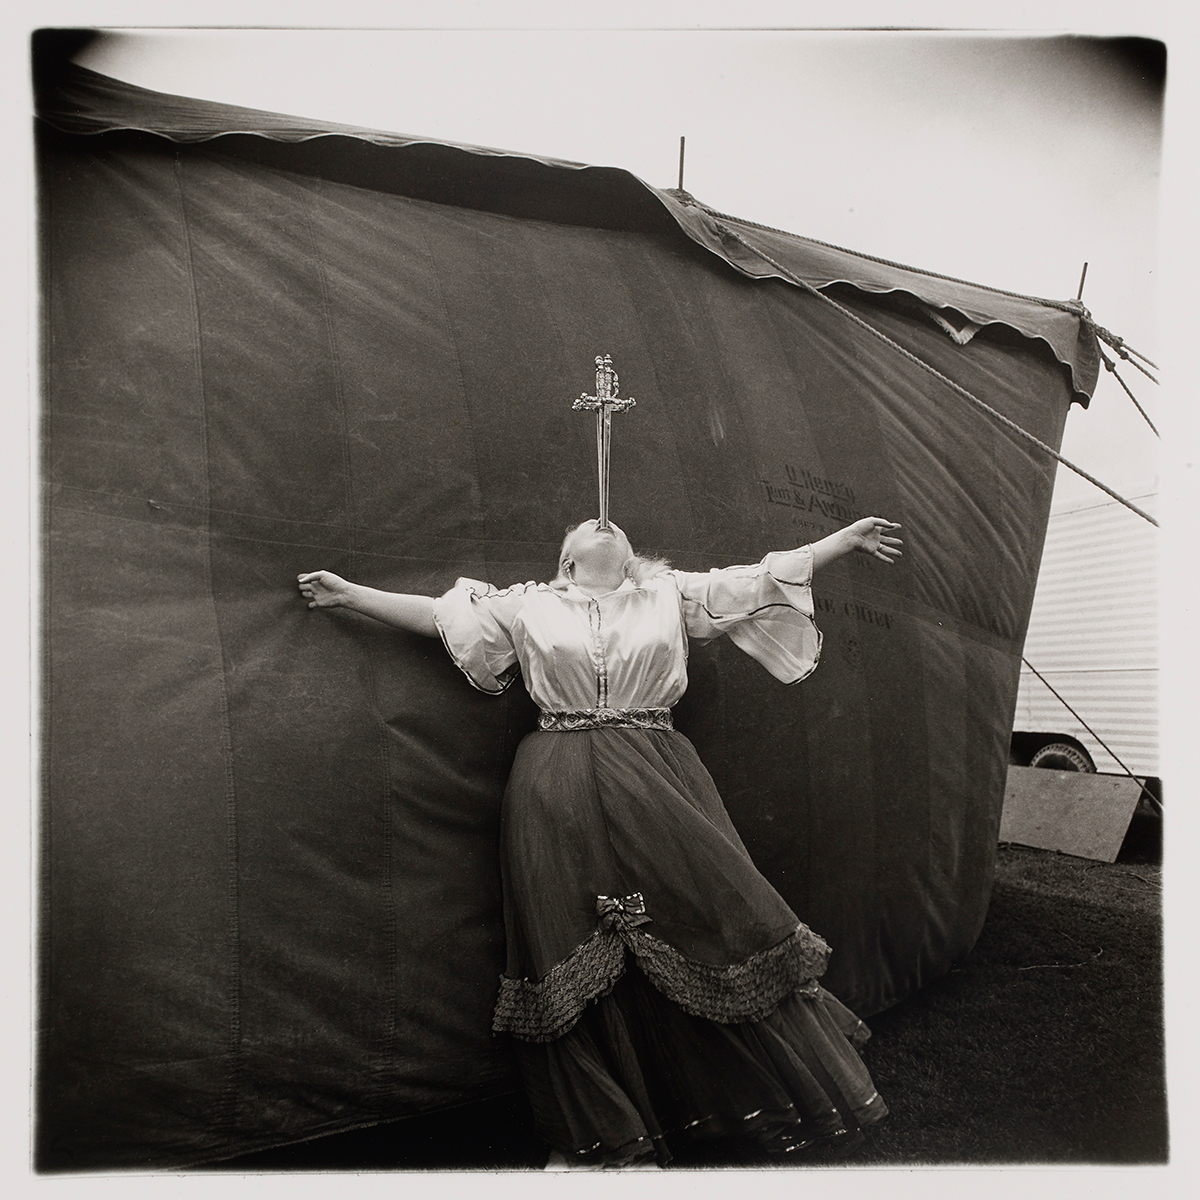     Diane Arbus, Albino sword swallower at a carnival, Md., 1970. Gelatin silver print, 50.8 x 40.6cm (sheet). Private collection, Toronto. © The Estate of Diane Arbus.

